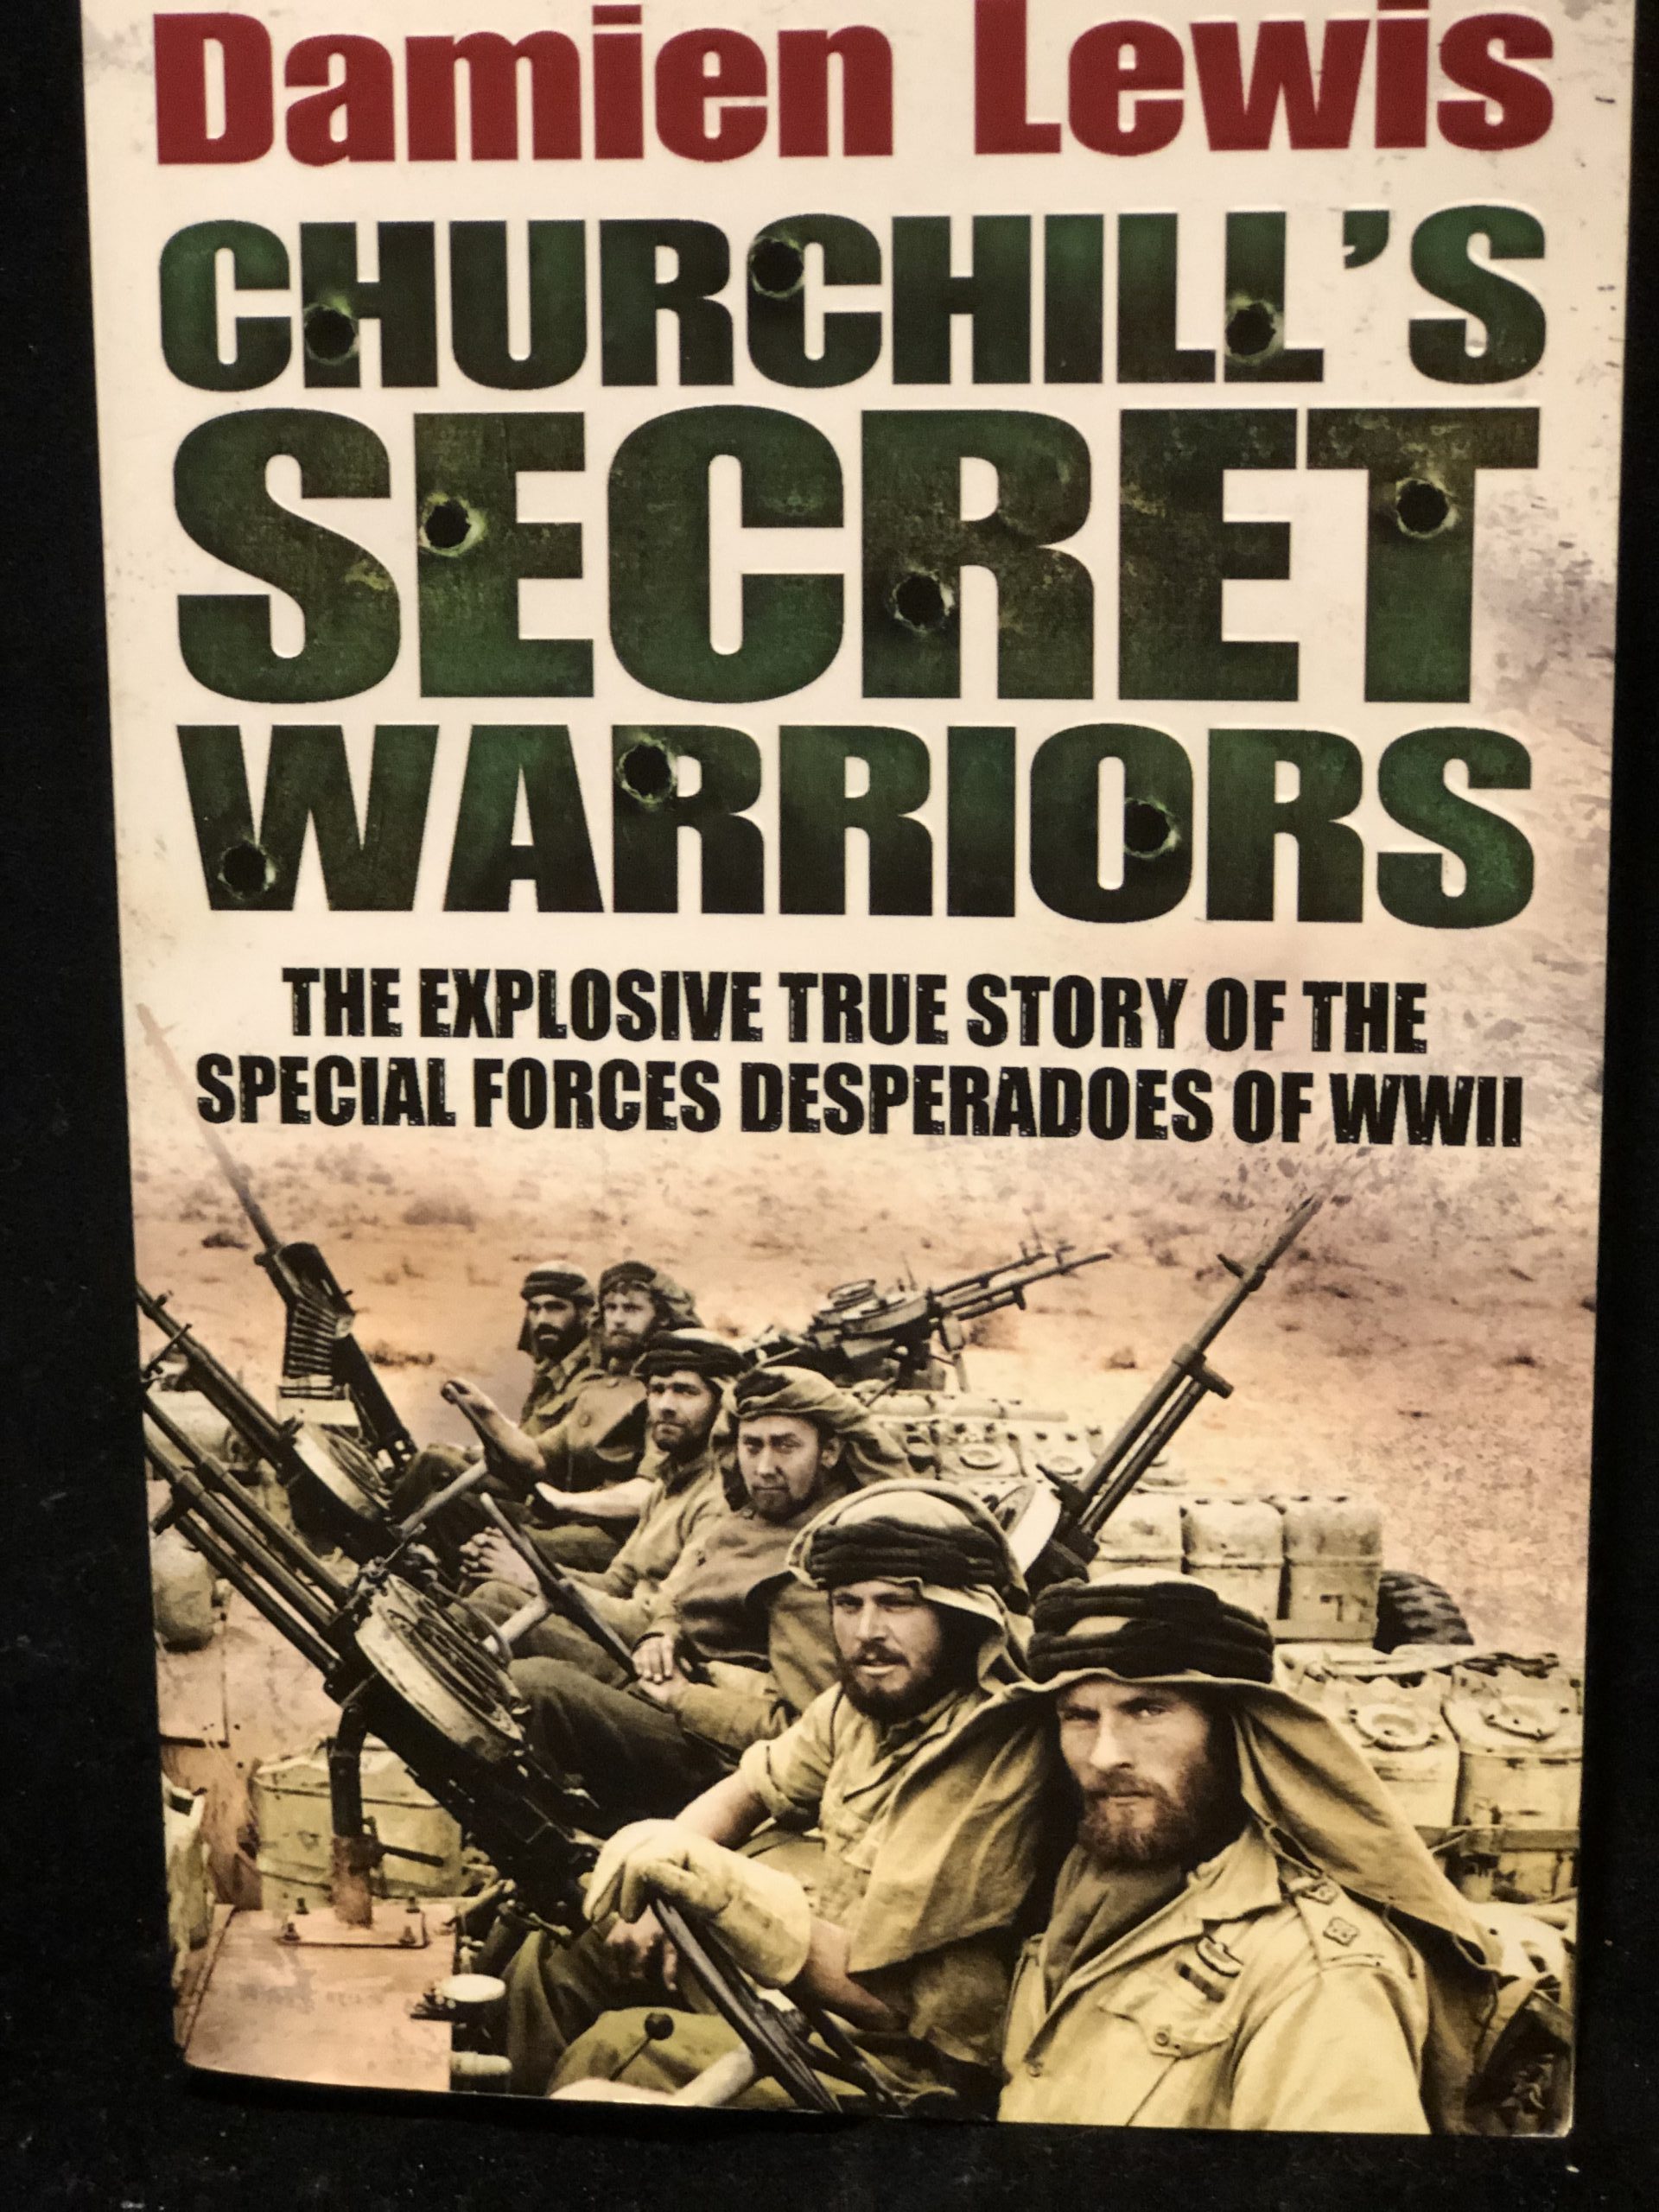 Churchill #39 s Secret Warriors: The Explosive True Story of the Special